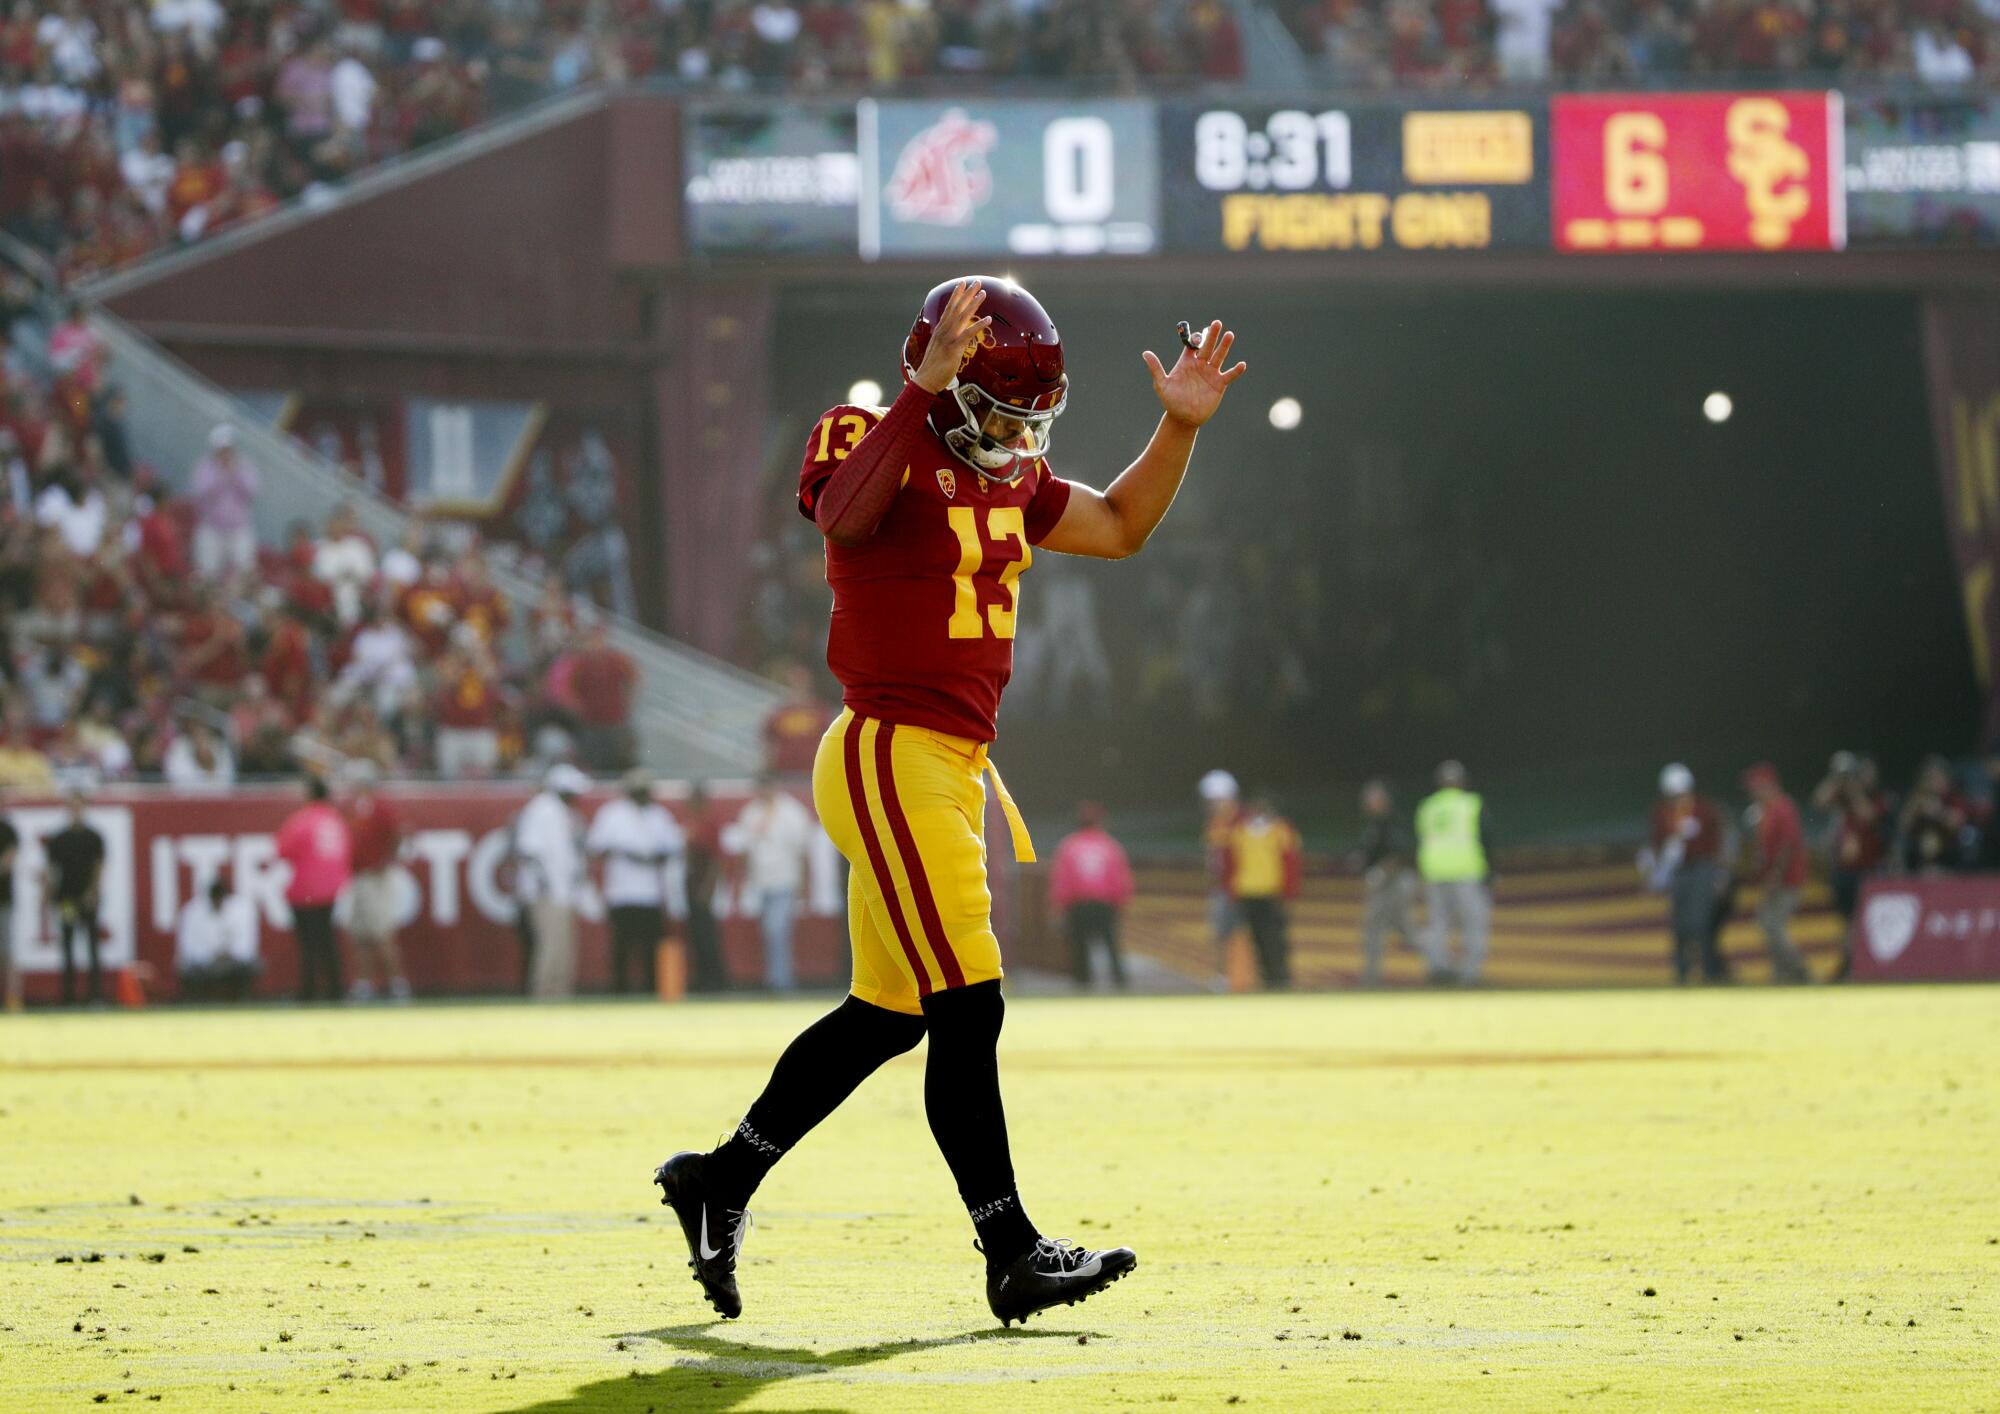 USC quarterback Caleb Williams celebrates after throwing a touchdown pass against Washington State.